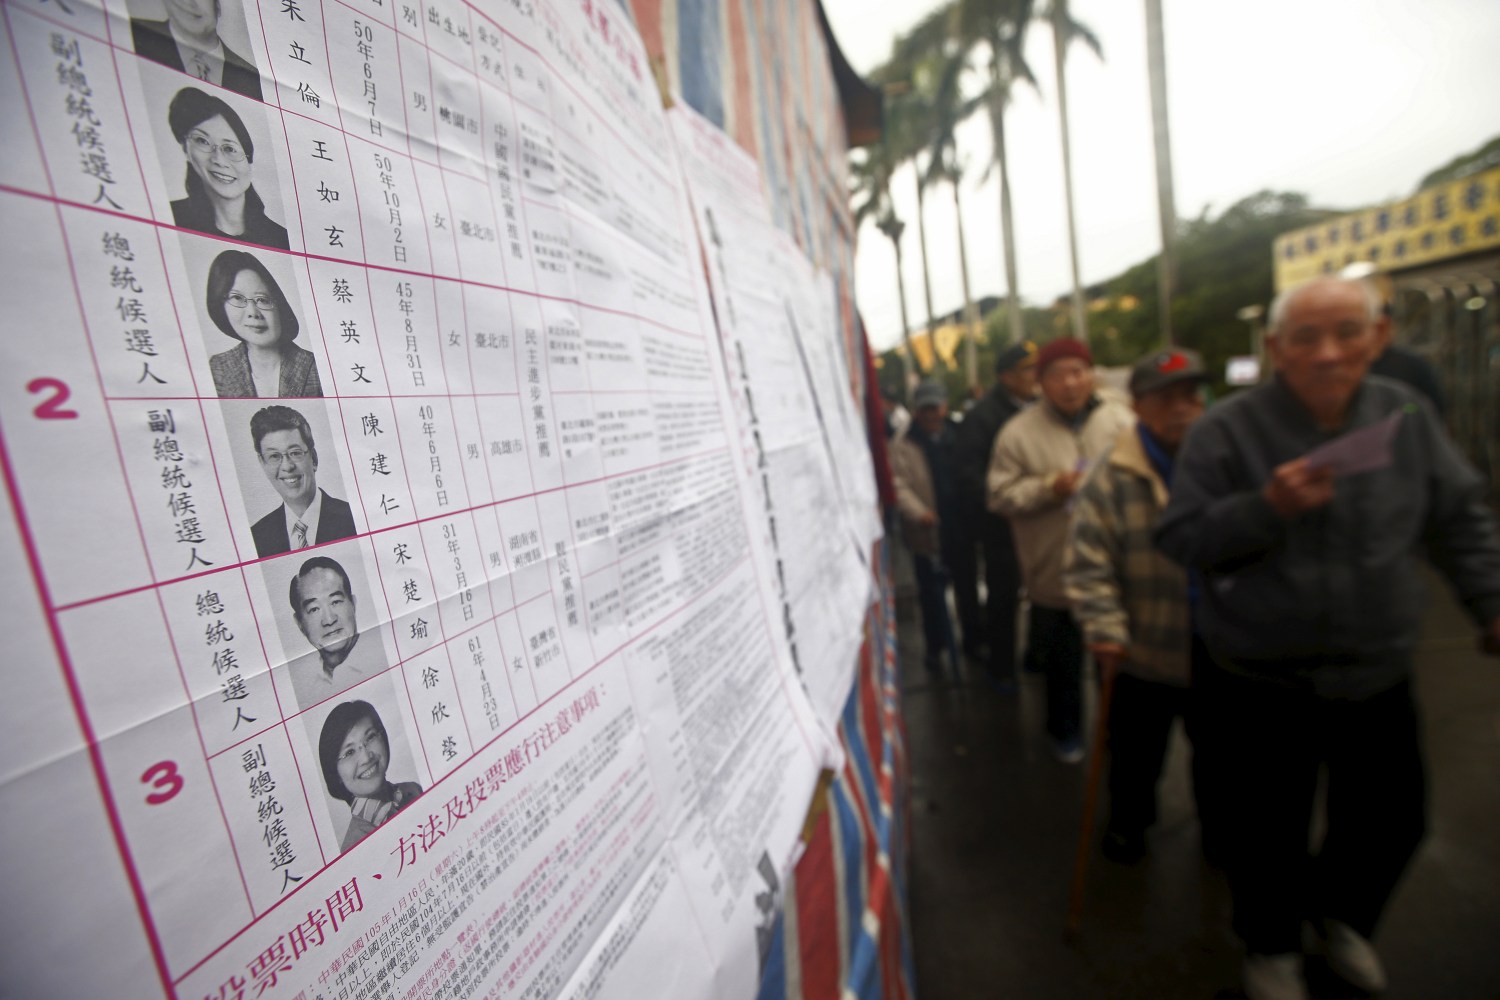 Voters queue next to a poster of candidates to cast their ballots at a polling station during general elections